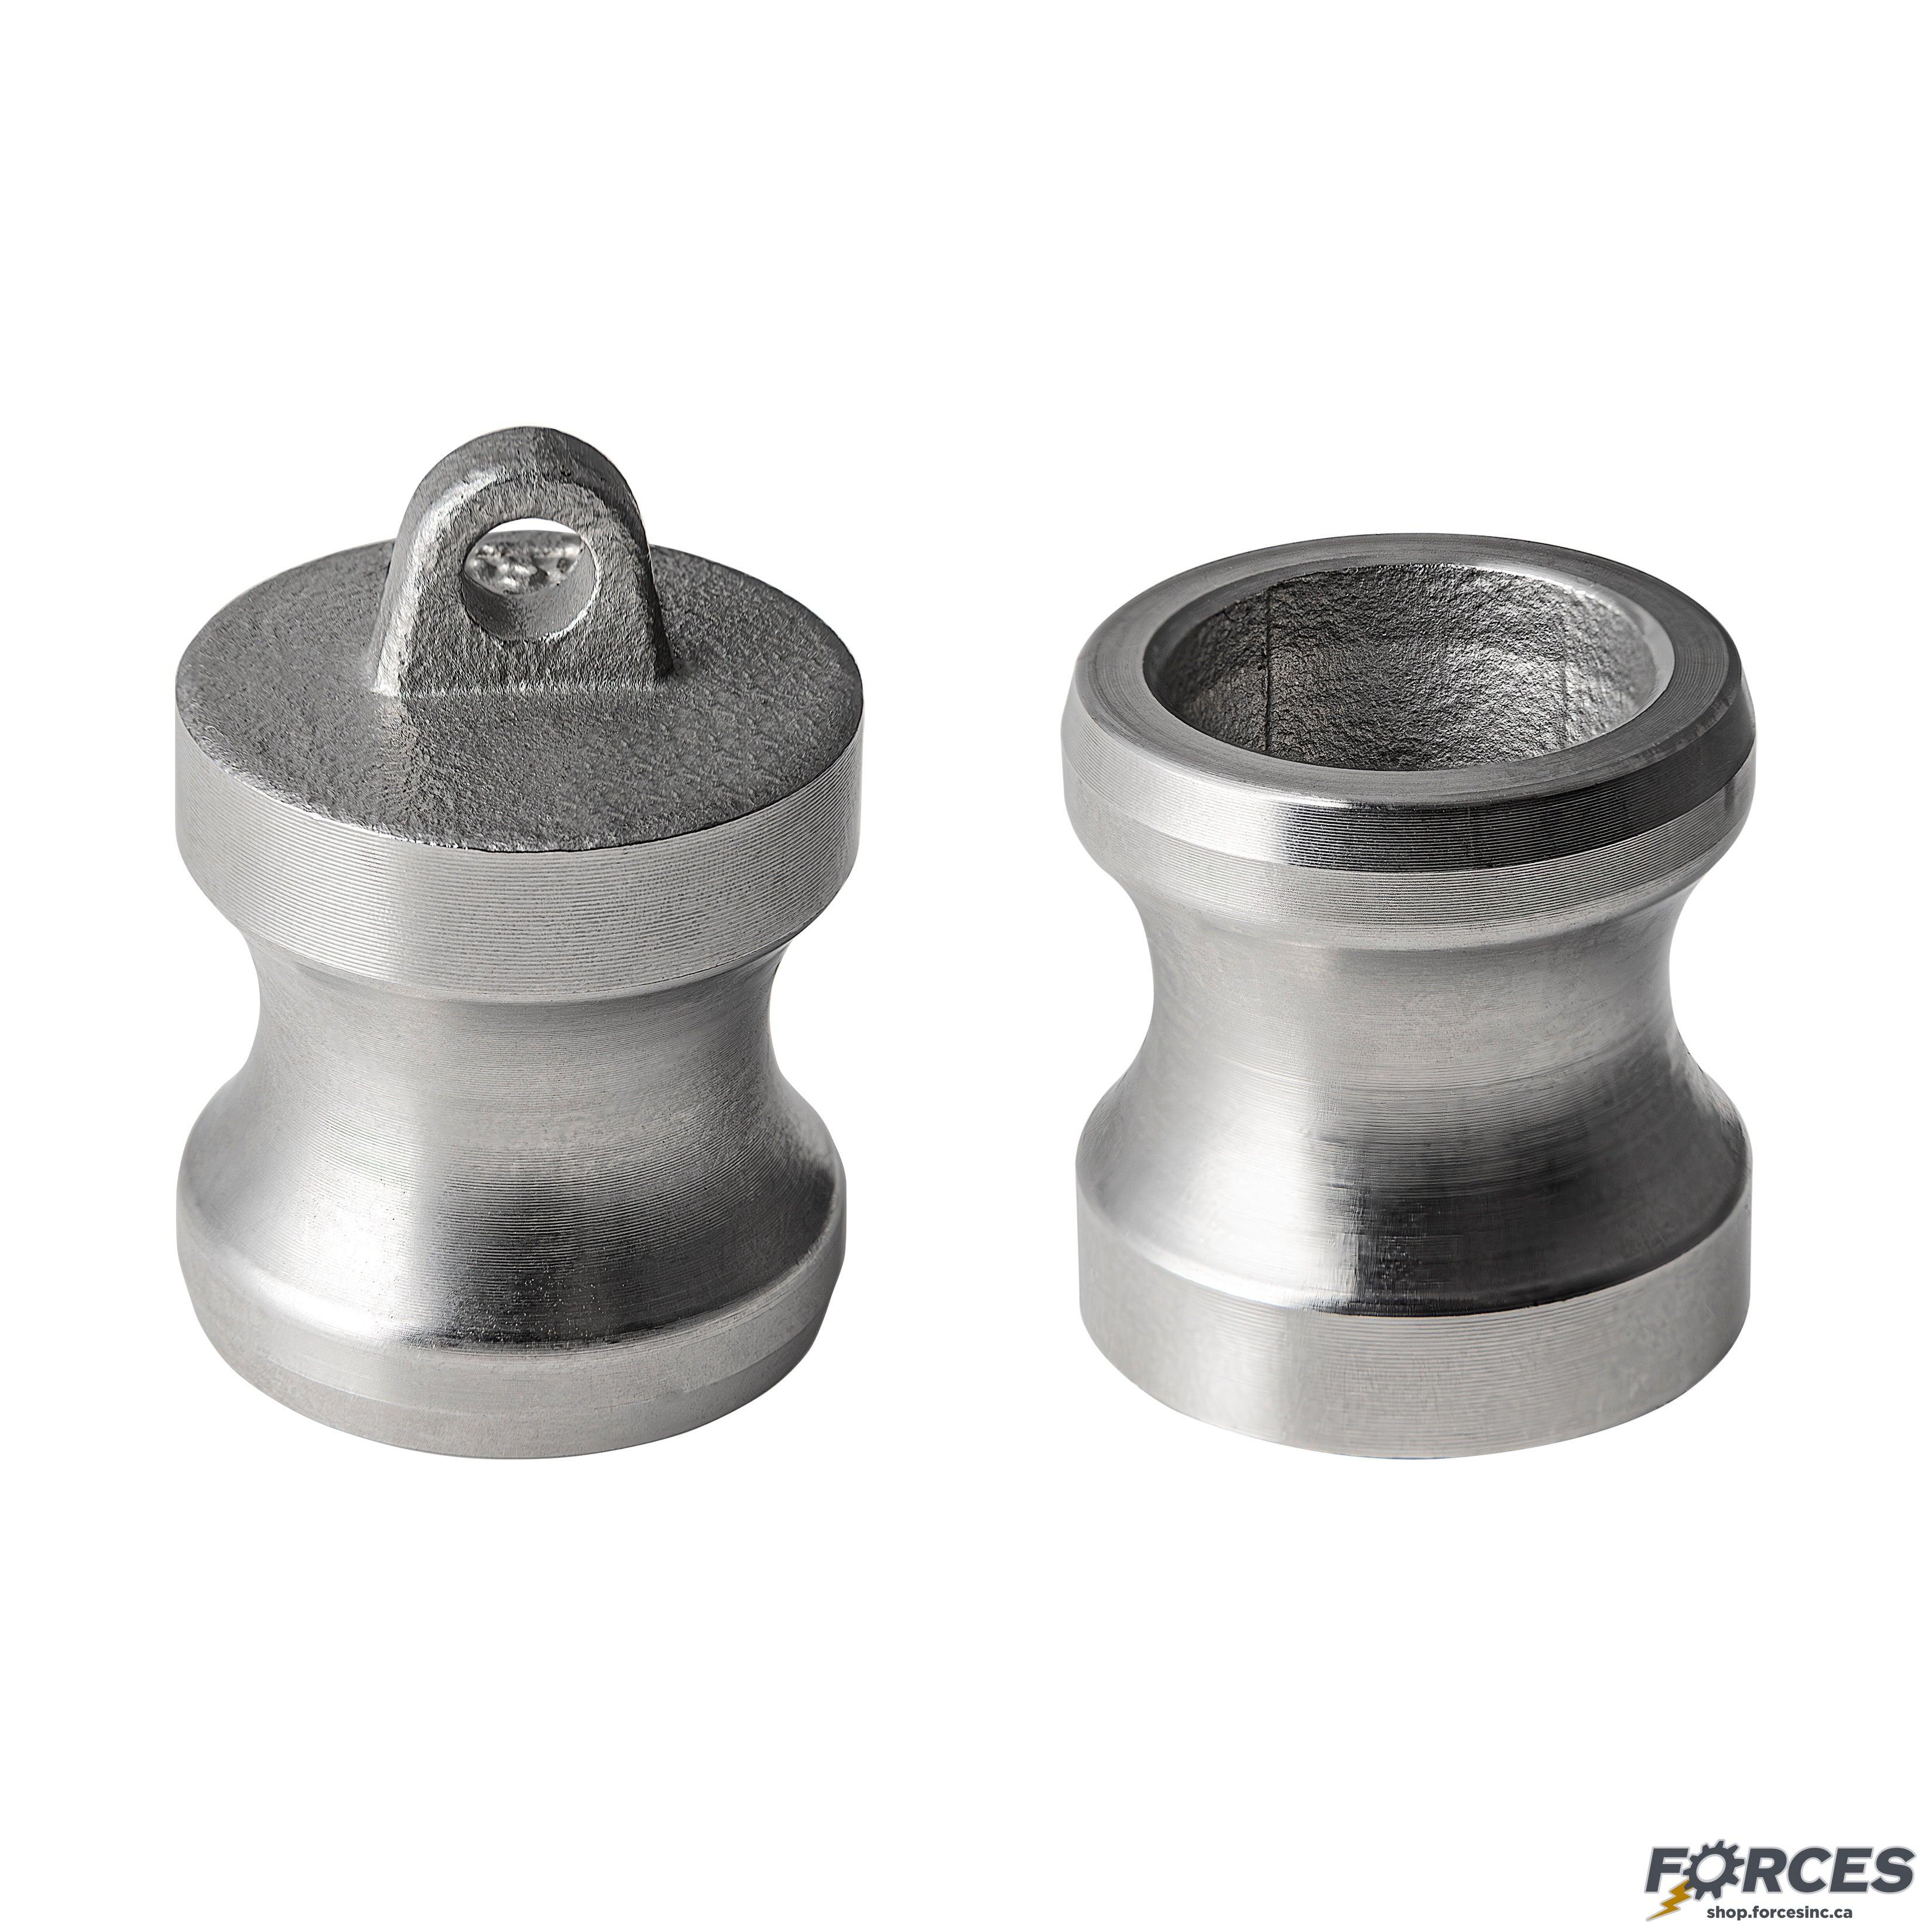 2-1/2" Type DP Camlock Fitting Stainless Steel 316 - Forces Inc